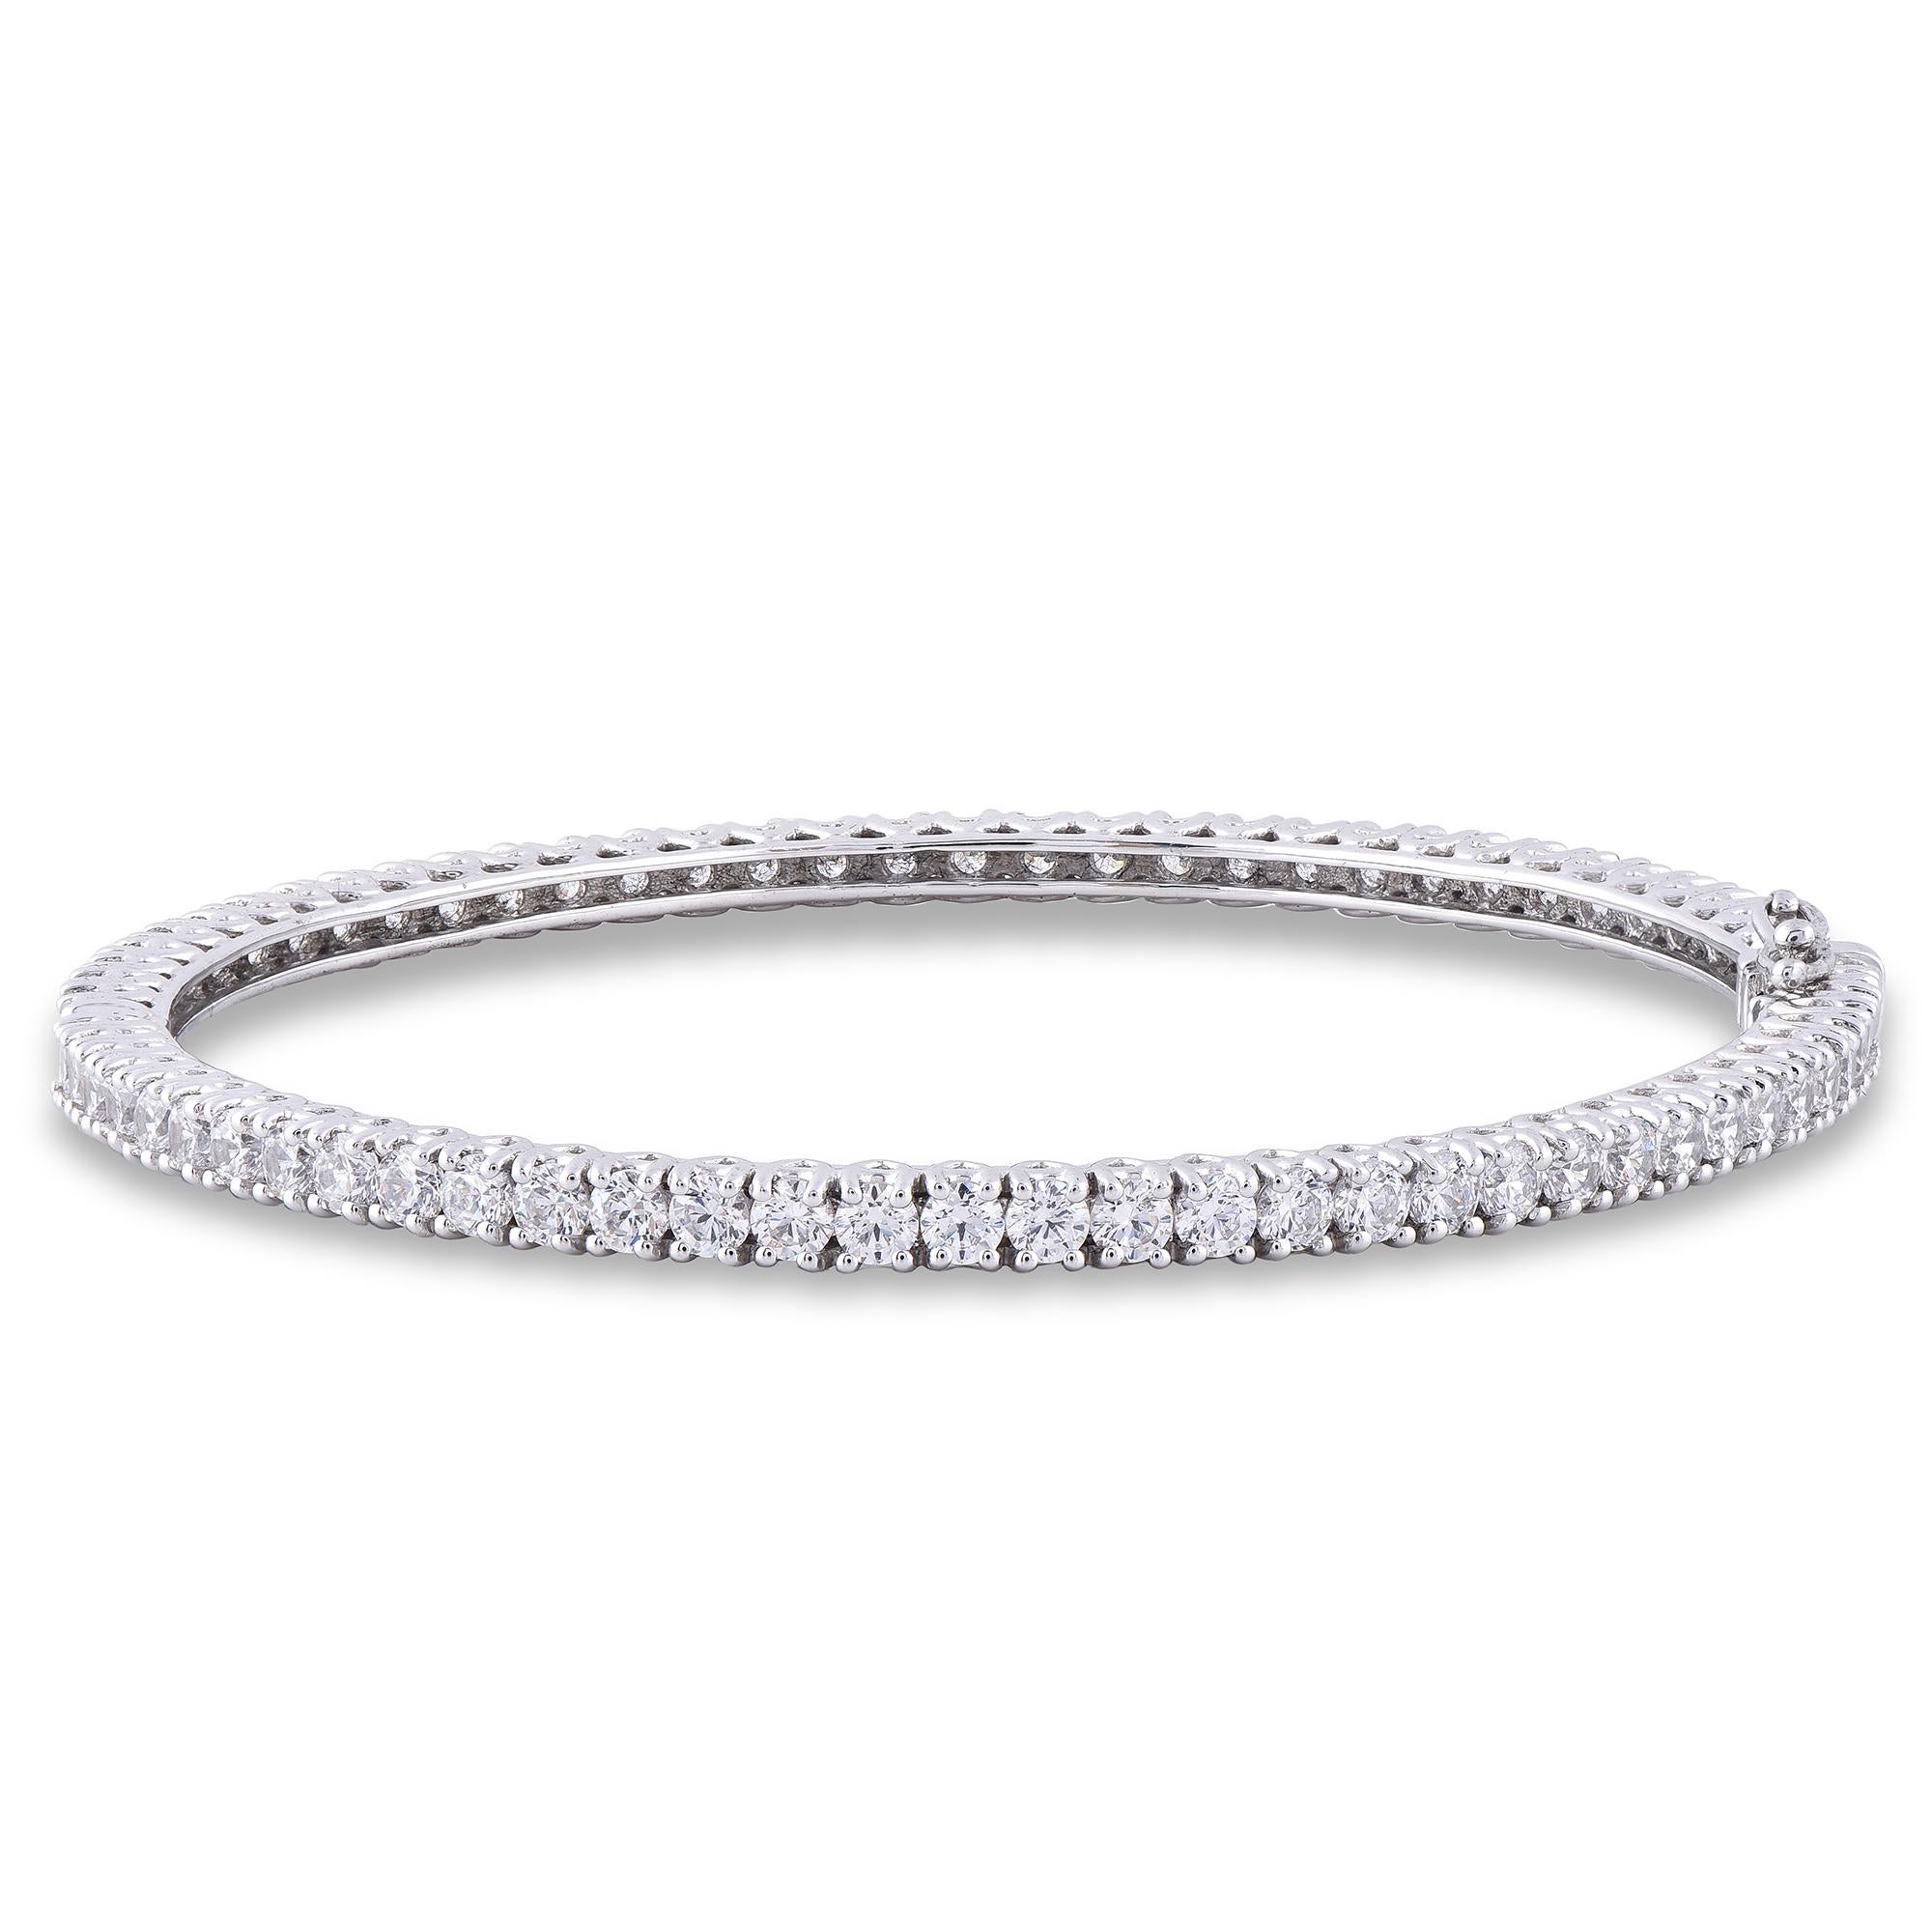 A graceful addition to her wardrobe, this diamond tennis bangle brings the perfect touch of sparkle to her look. Beautifully hand-crafted by our inhouse experts in 18 karat white gold and embedded with 70 round brilliant diamond in prong setting.